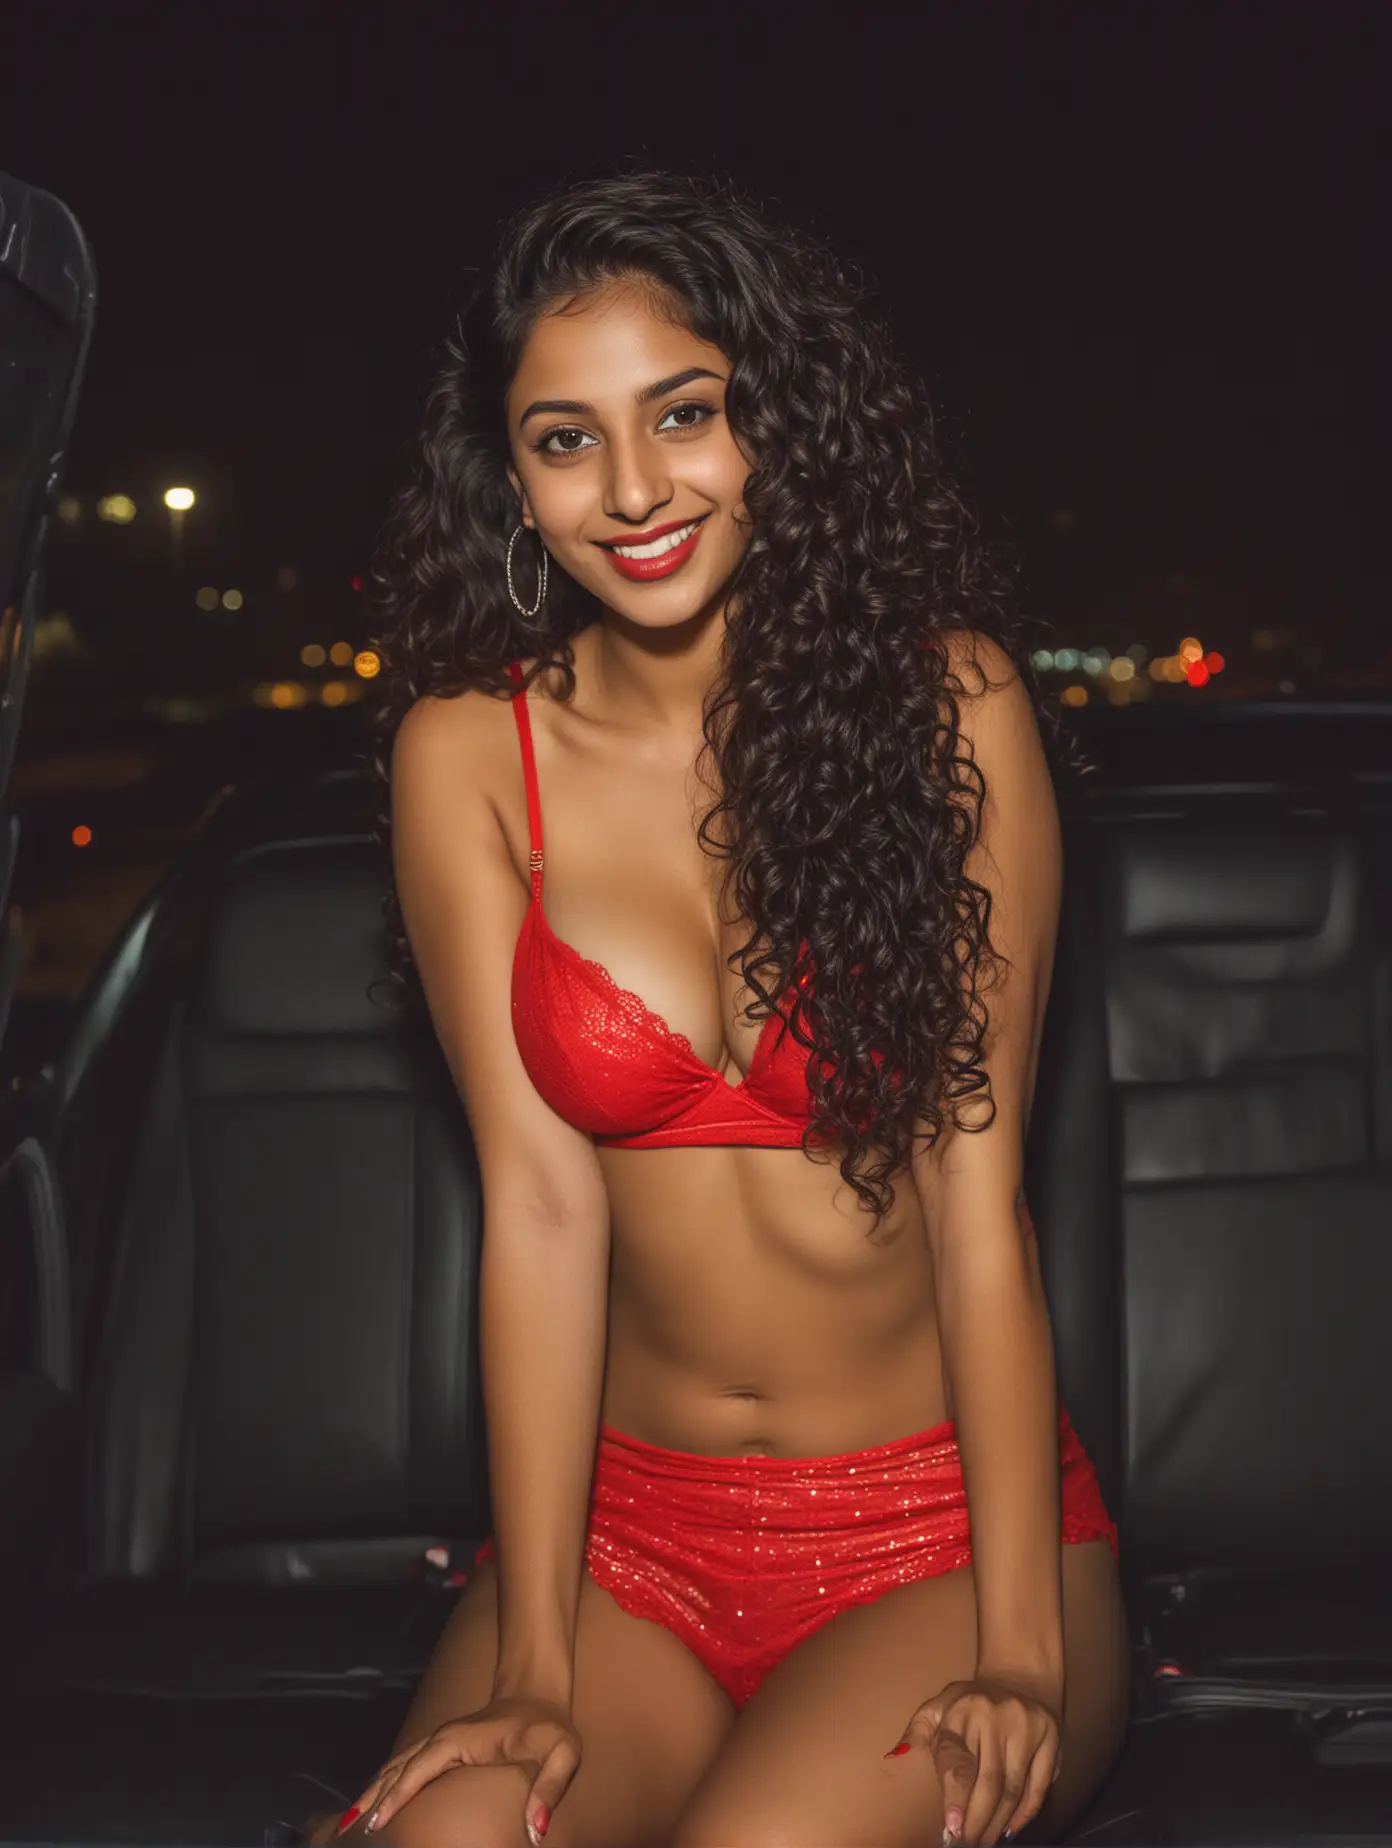 Youthful Indian Sikh Woman in Nighttime Car Portrait